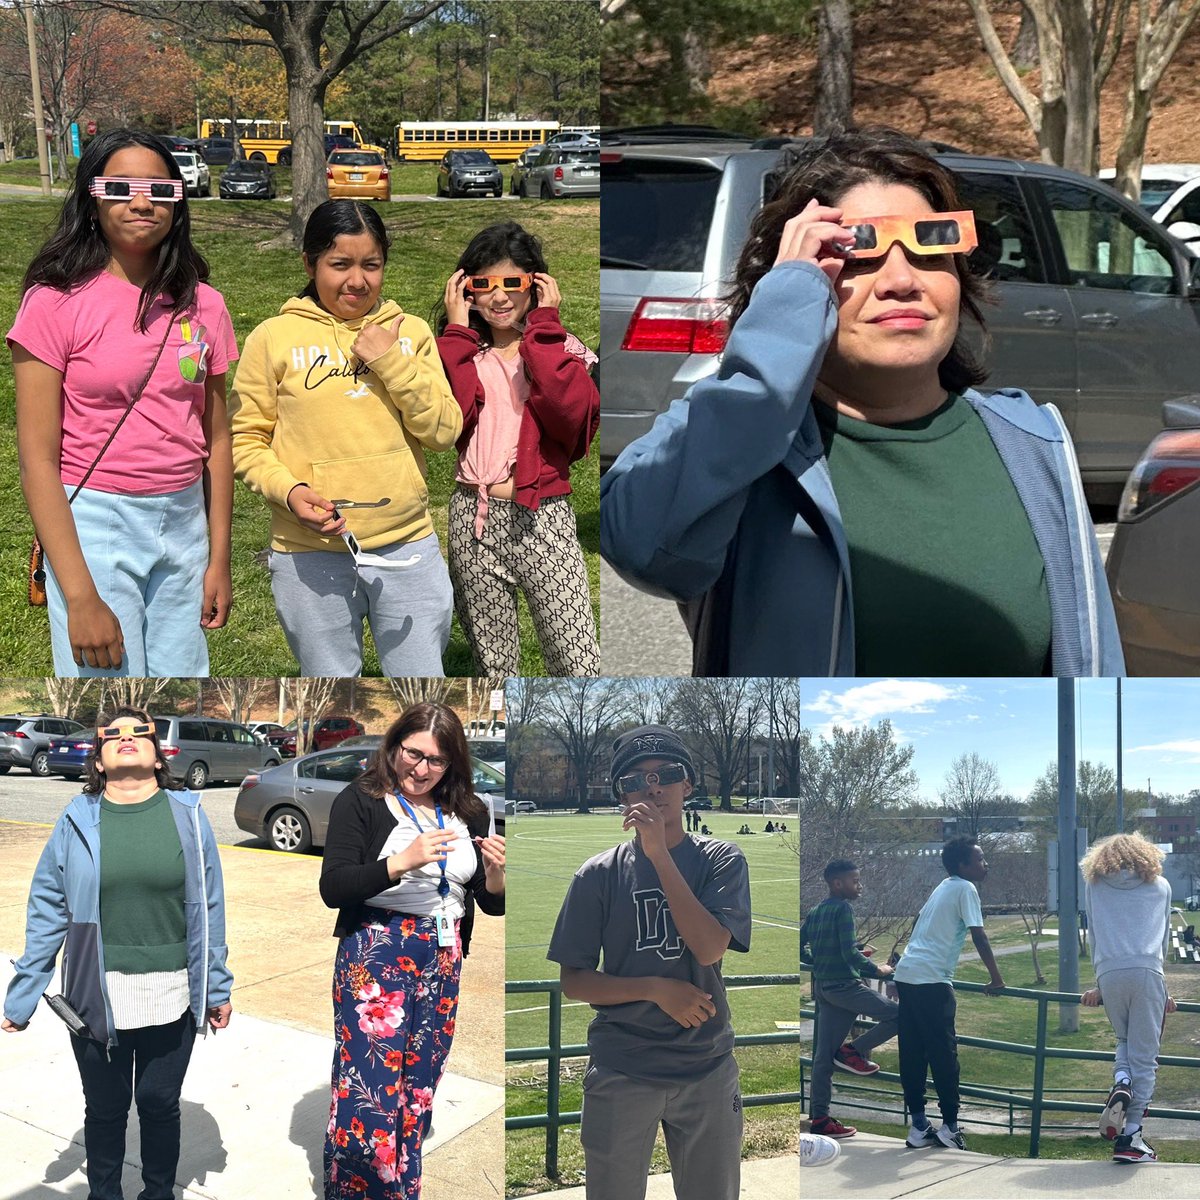 The #SolarEclipse was a big hit today! @APSGunston staff & students were excited to get outside & observe this historic event. @ilovearlingtonv @APS_STEM @WorldAndScience #science #sun #moon #earth